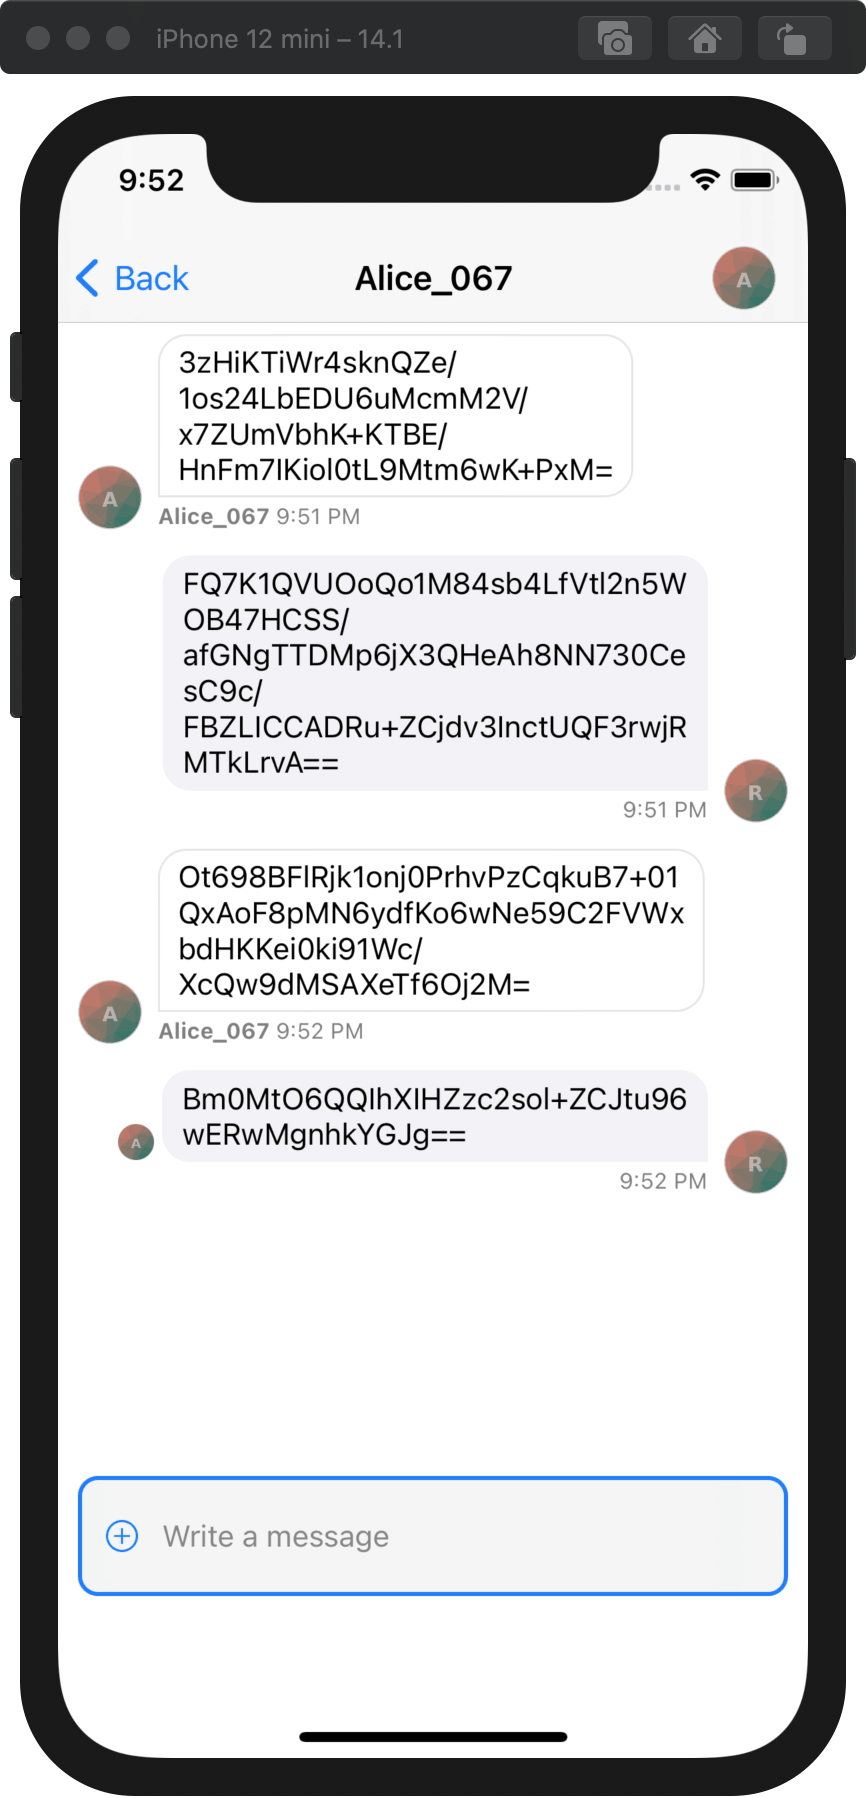 Animation shows an encrypted chat screen alternating every second between encrypted and decrypted messages